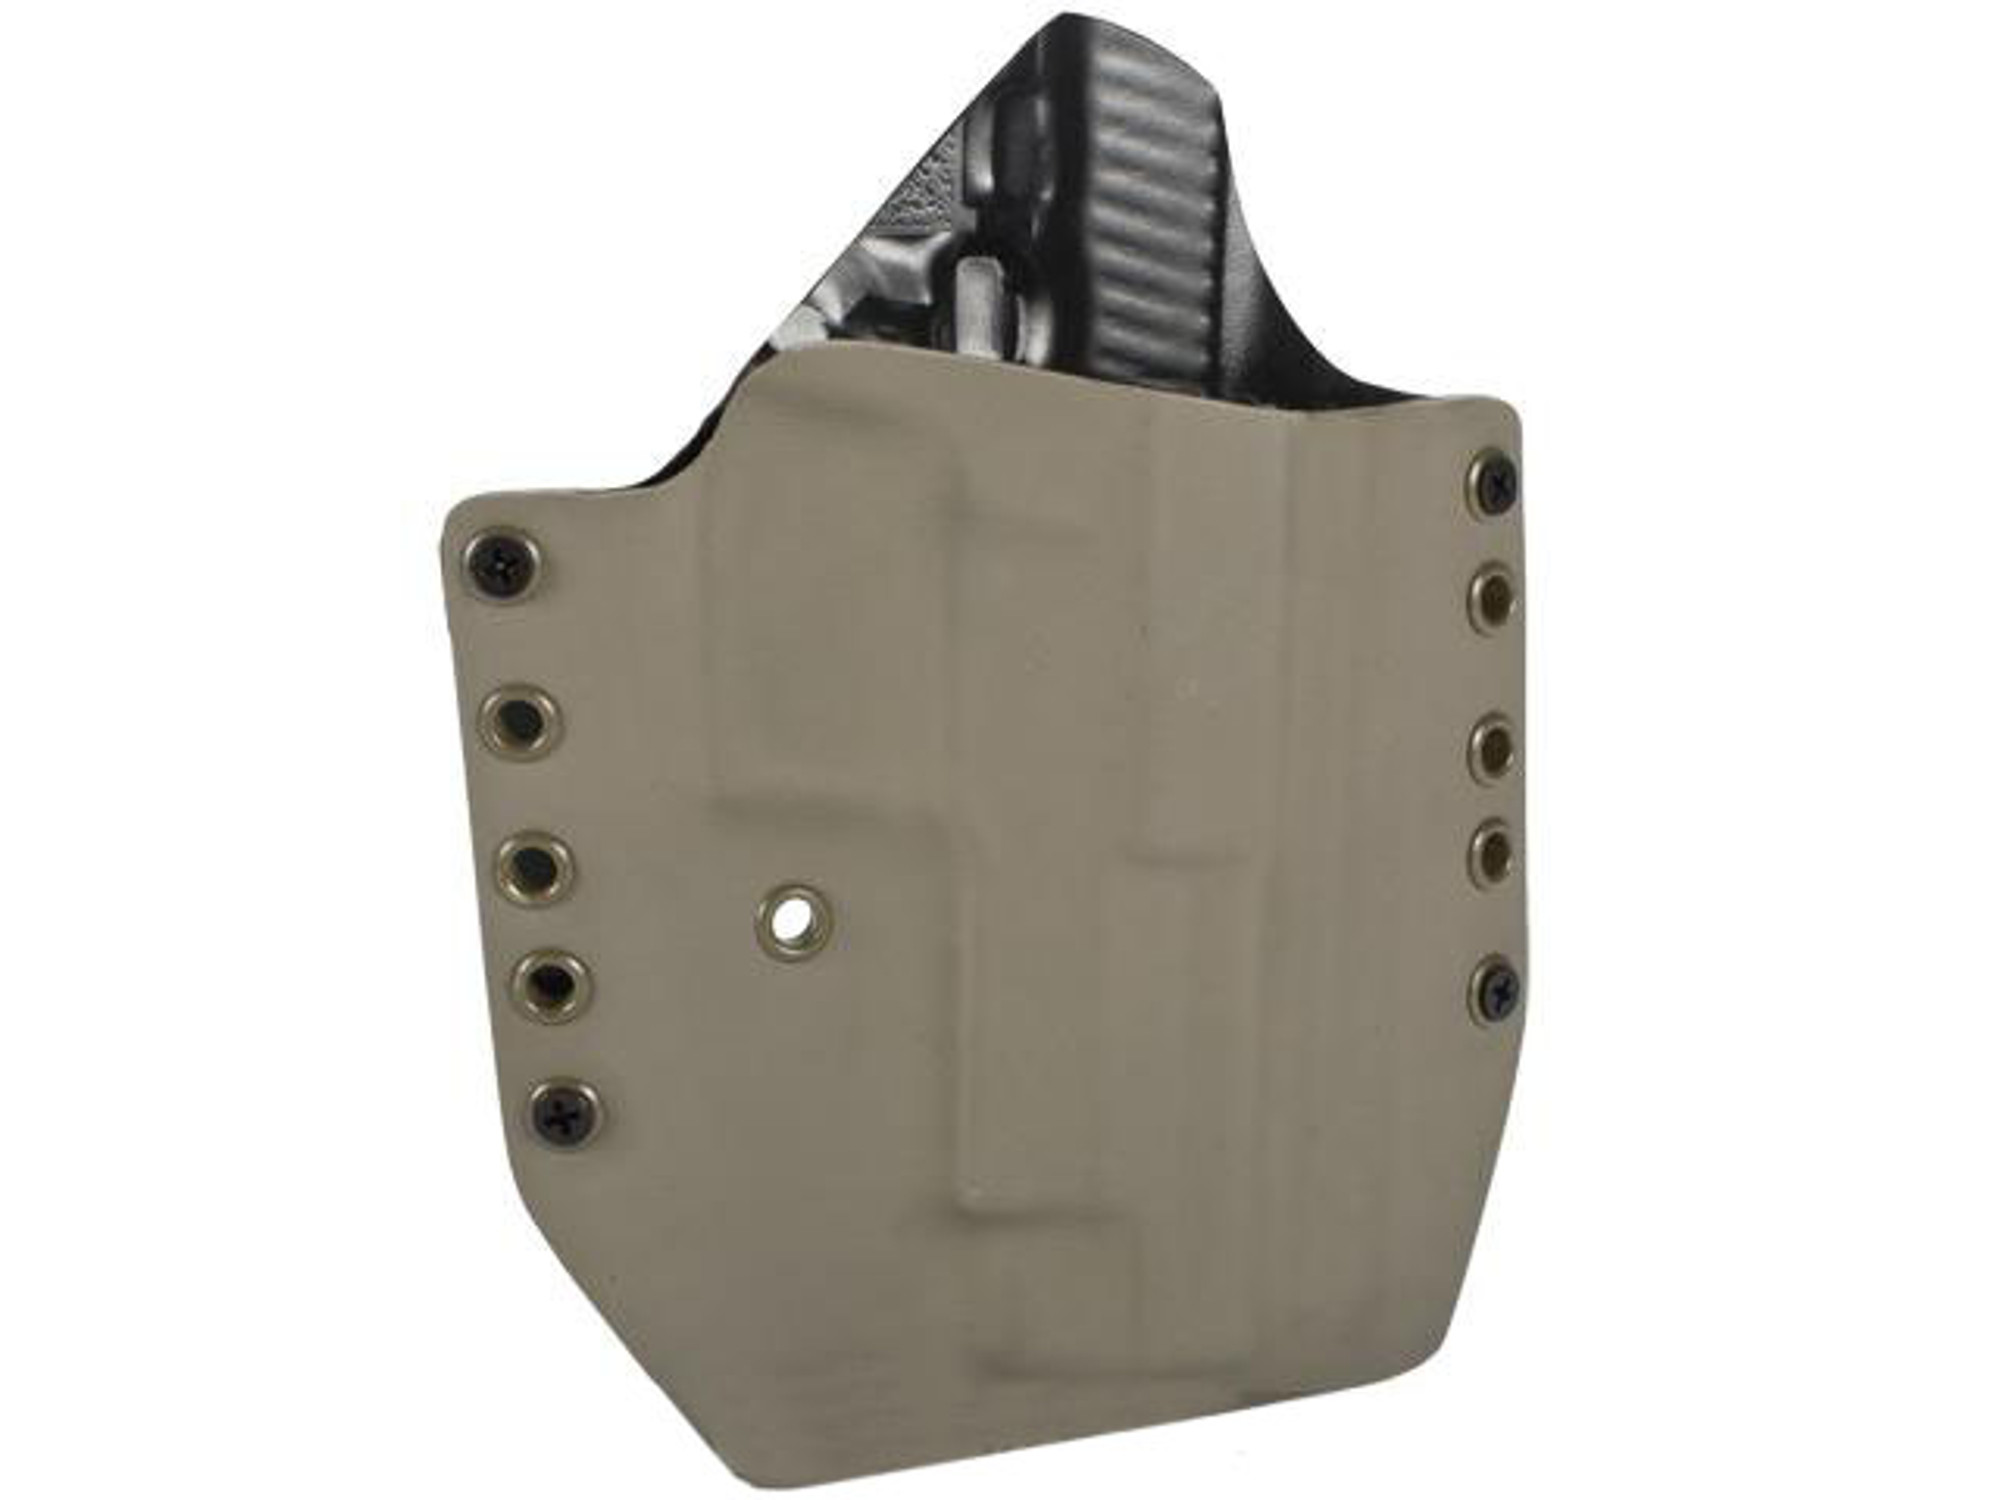 KAOS Concealment Kydex Belt / MOLLE Holster - KWA P226 (Right / Dark Earth)